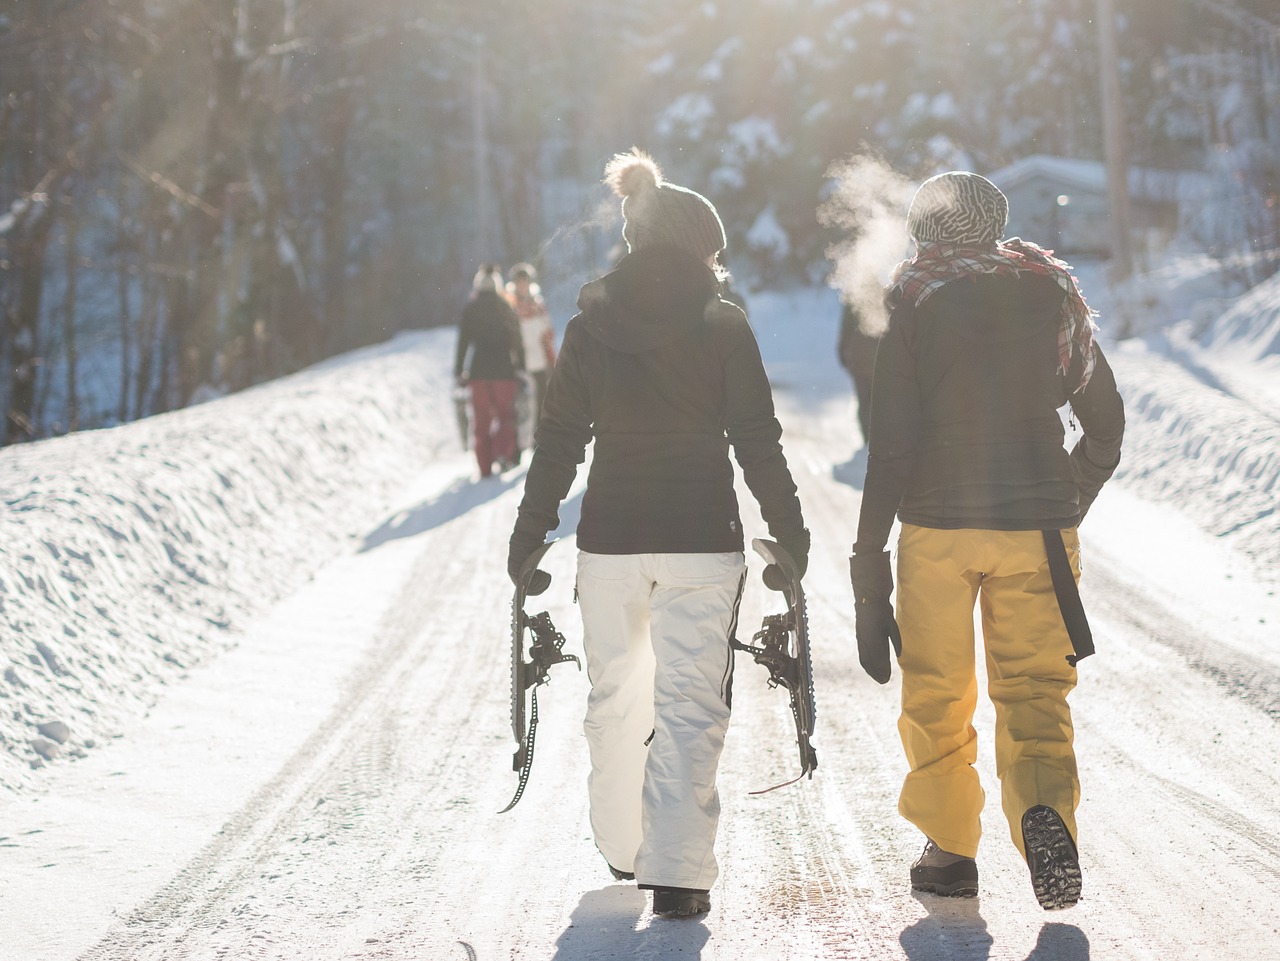 Having a friend who is also looking to get fit will provide you both with a great fitness companion – whether you want to go snow shoeing, hiking, or just want to frolic around in the snow, a fitness friend is the best way to stay fit this winter